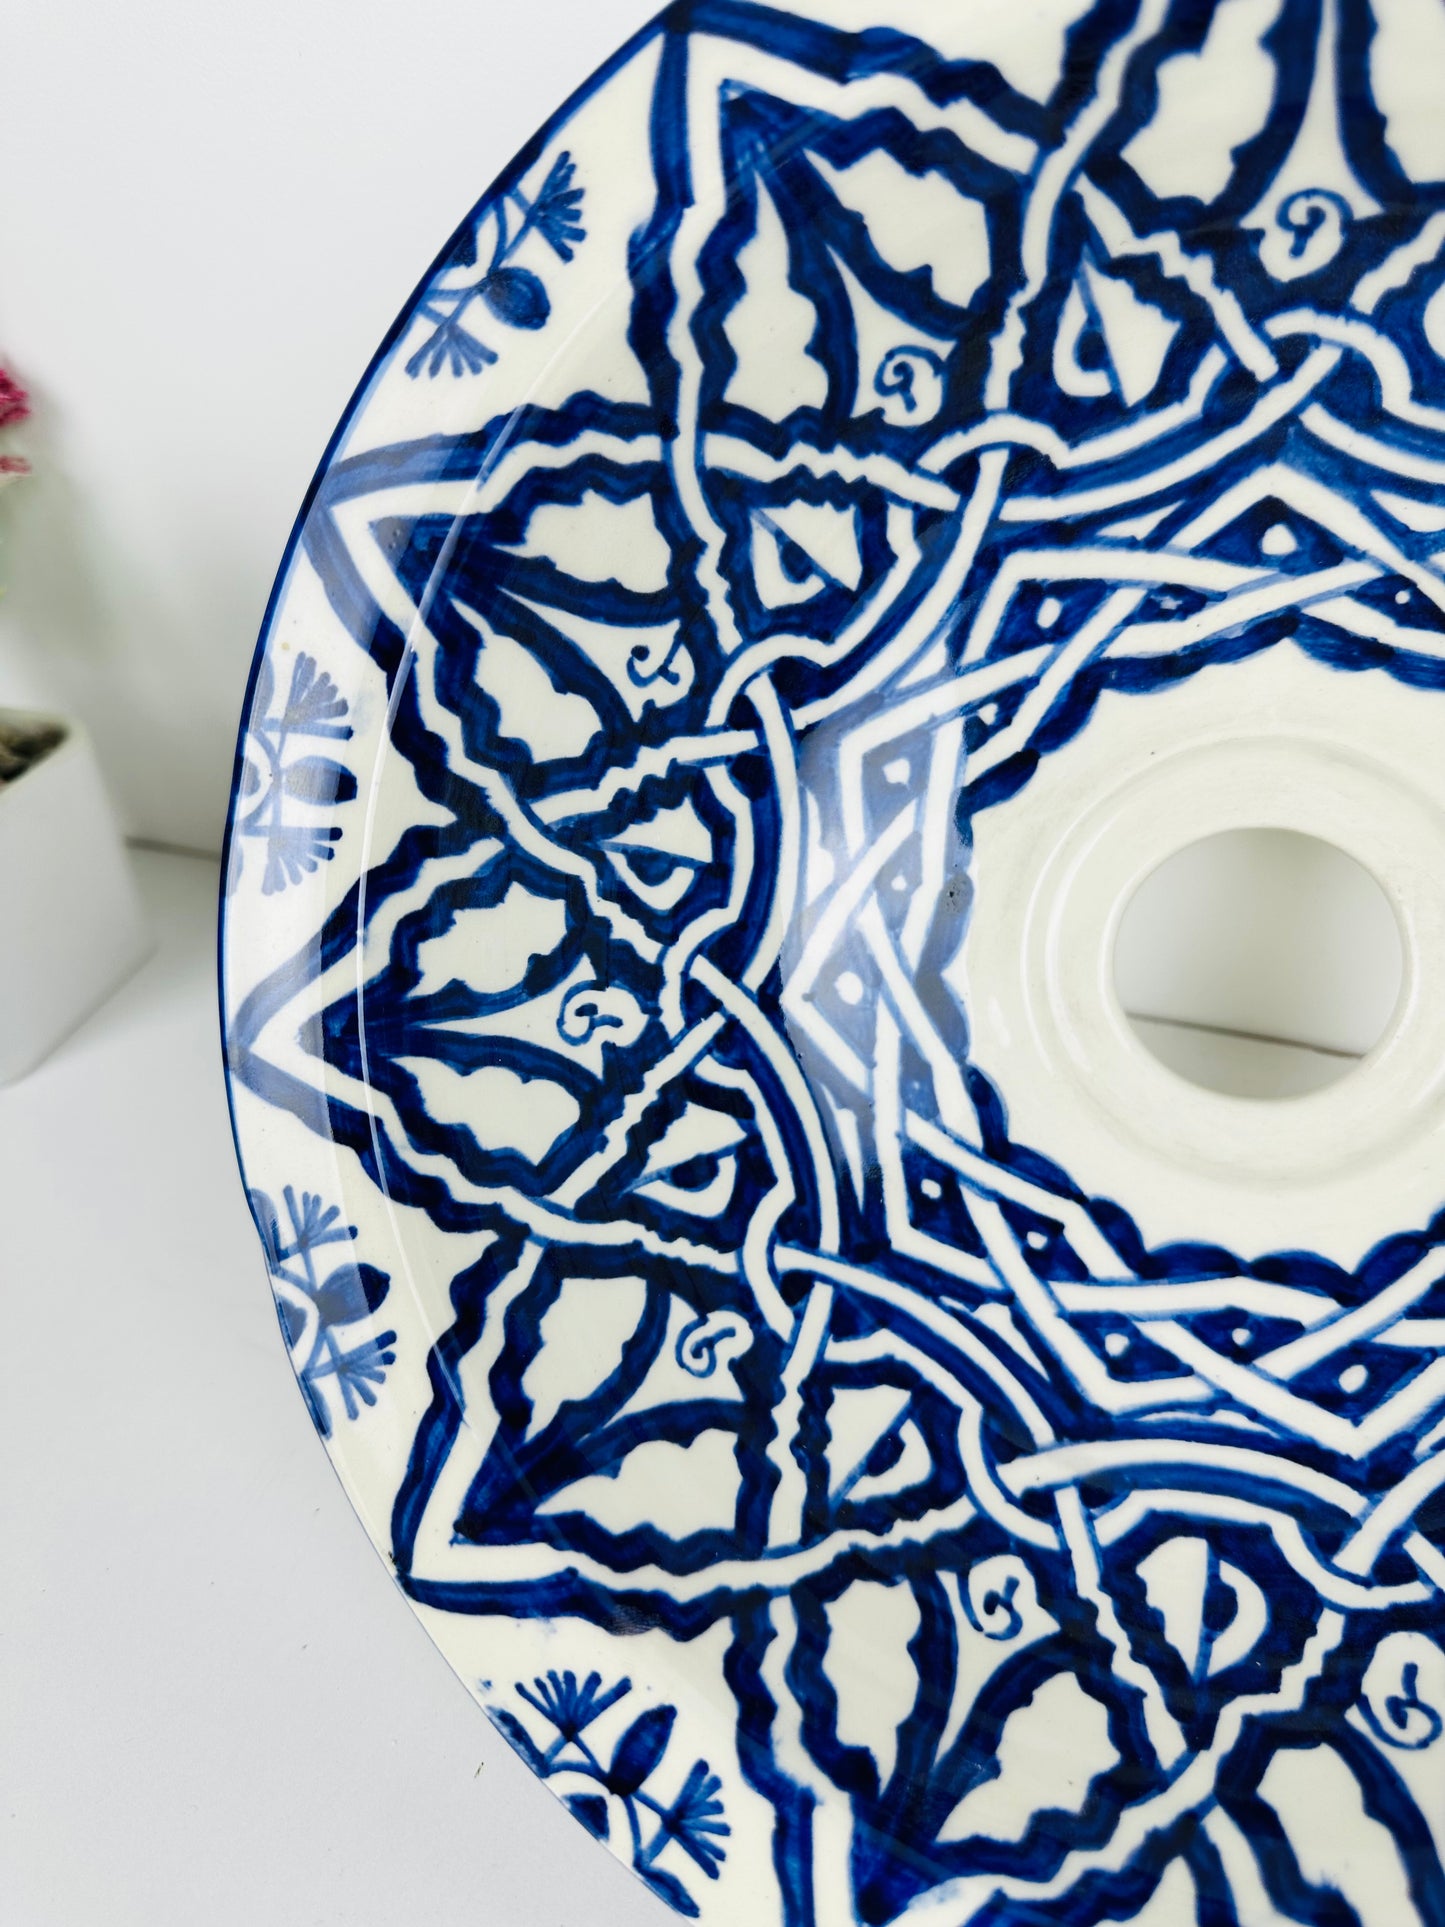 Blue Medina: Handcrafted Ceramic Sink with Moroccan Blue Design